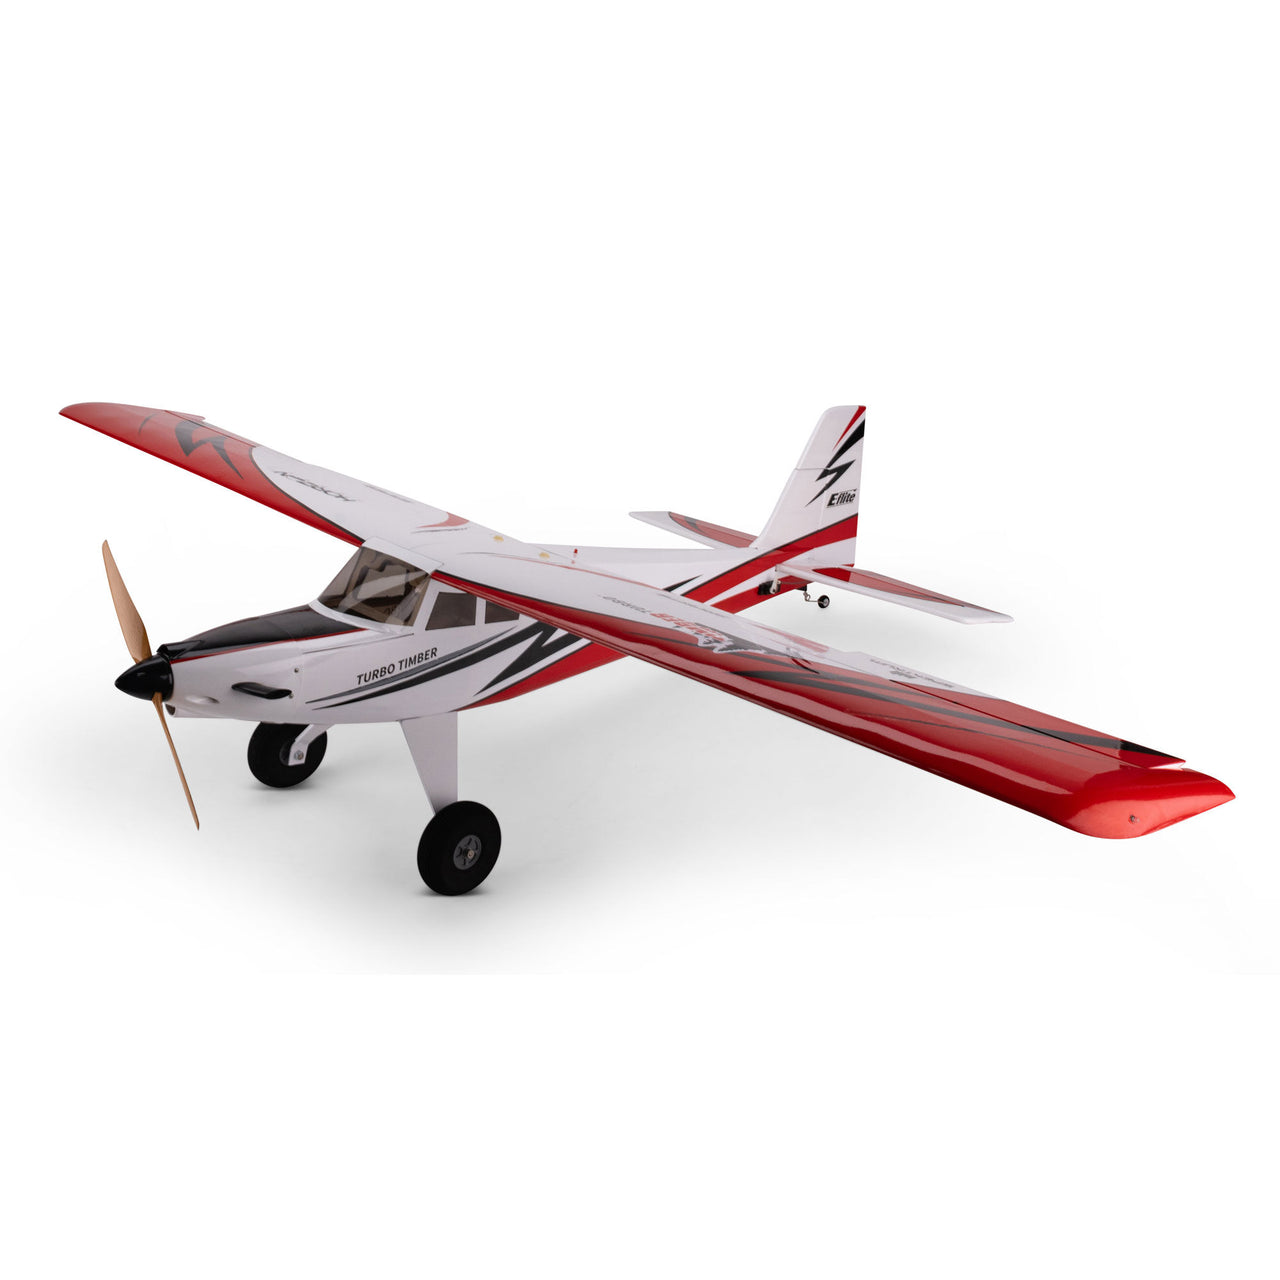 EFL71750 E-Flite Turbo Timber SWS 2.0m BNF Basic with AS3X and SAFE Select